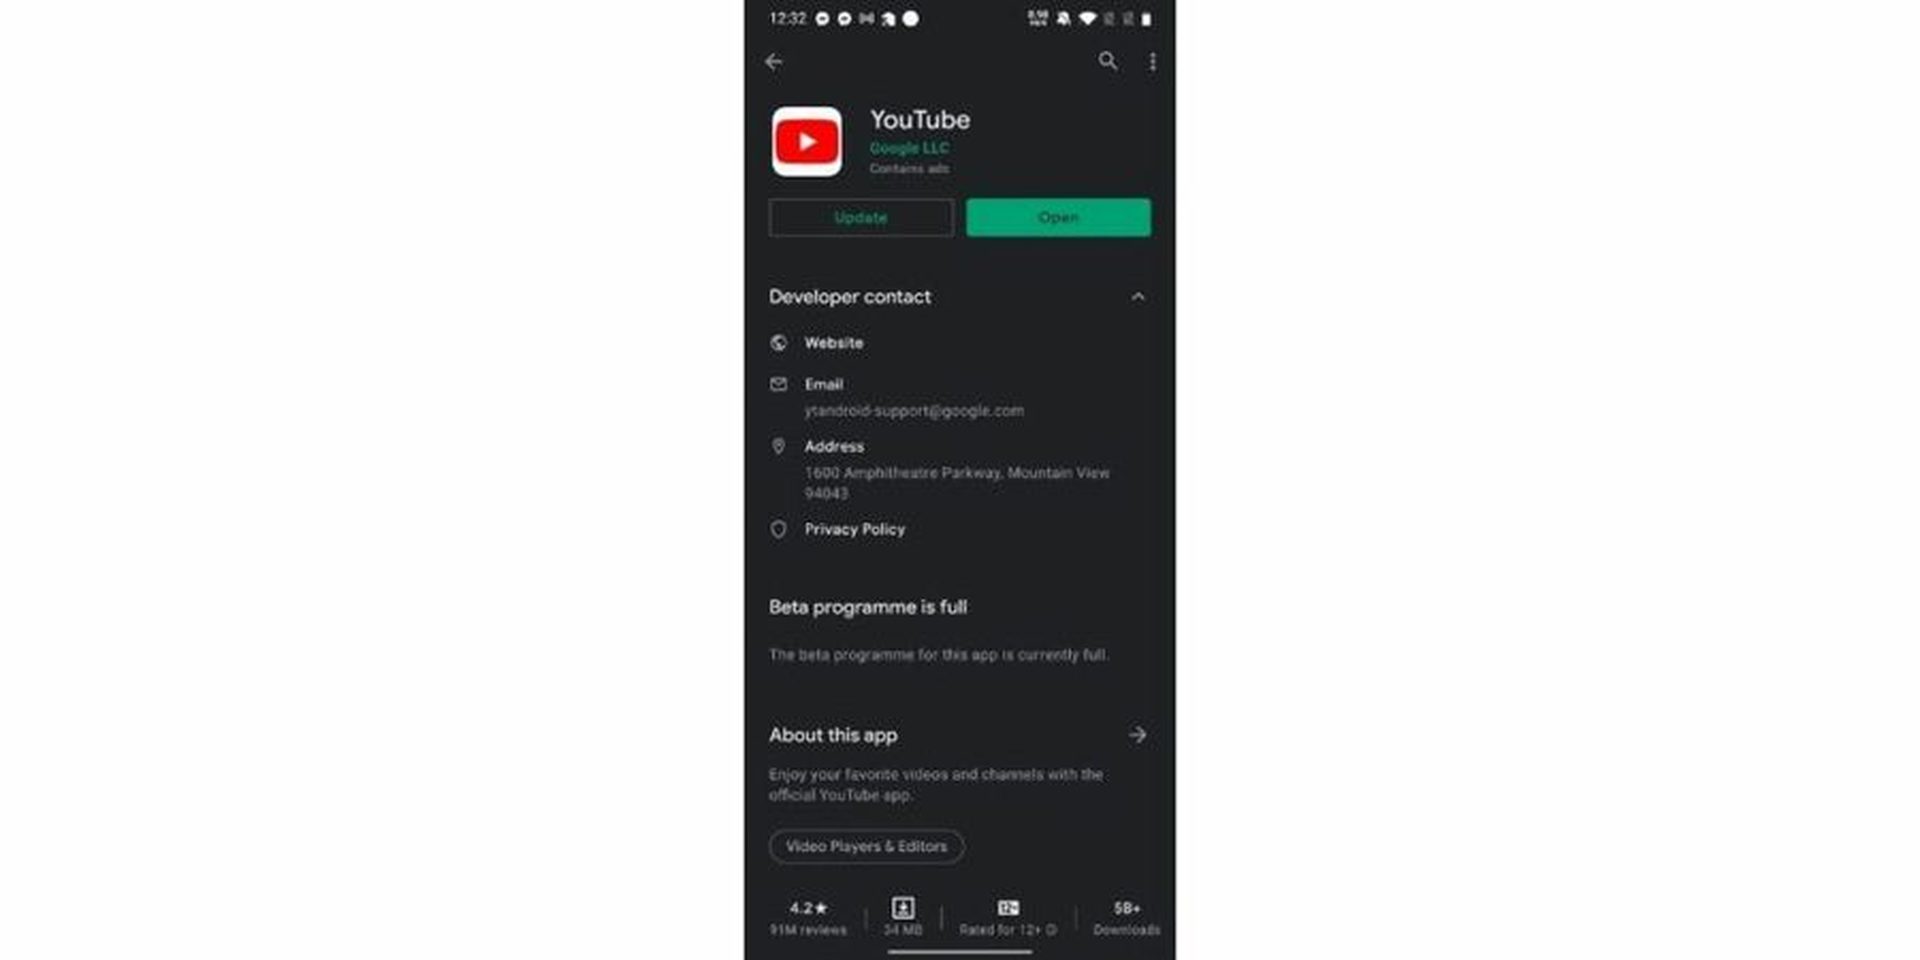 How to fix YouTube not working on Android?